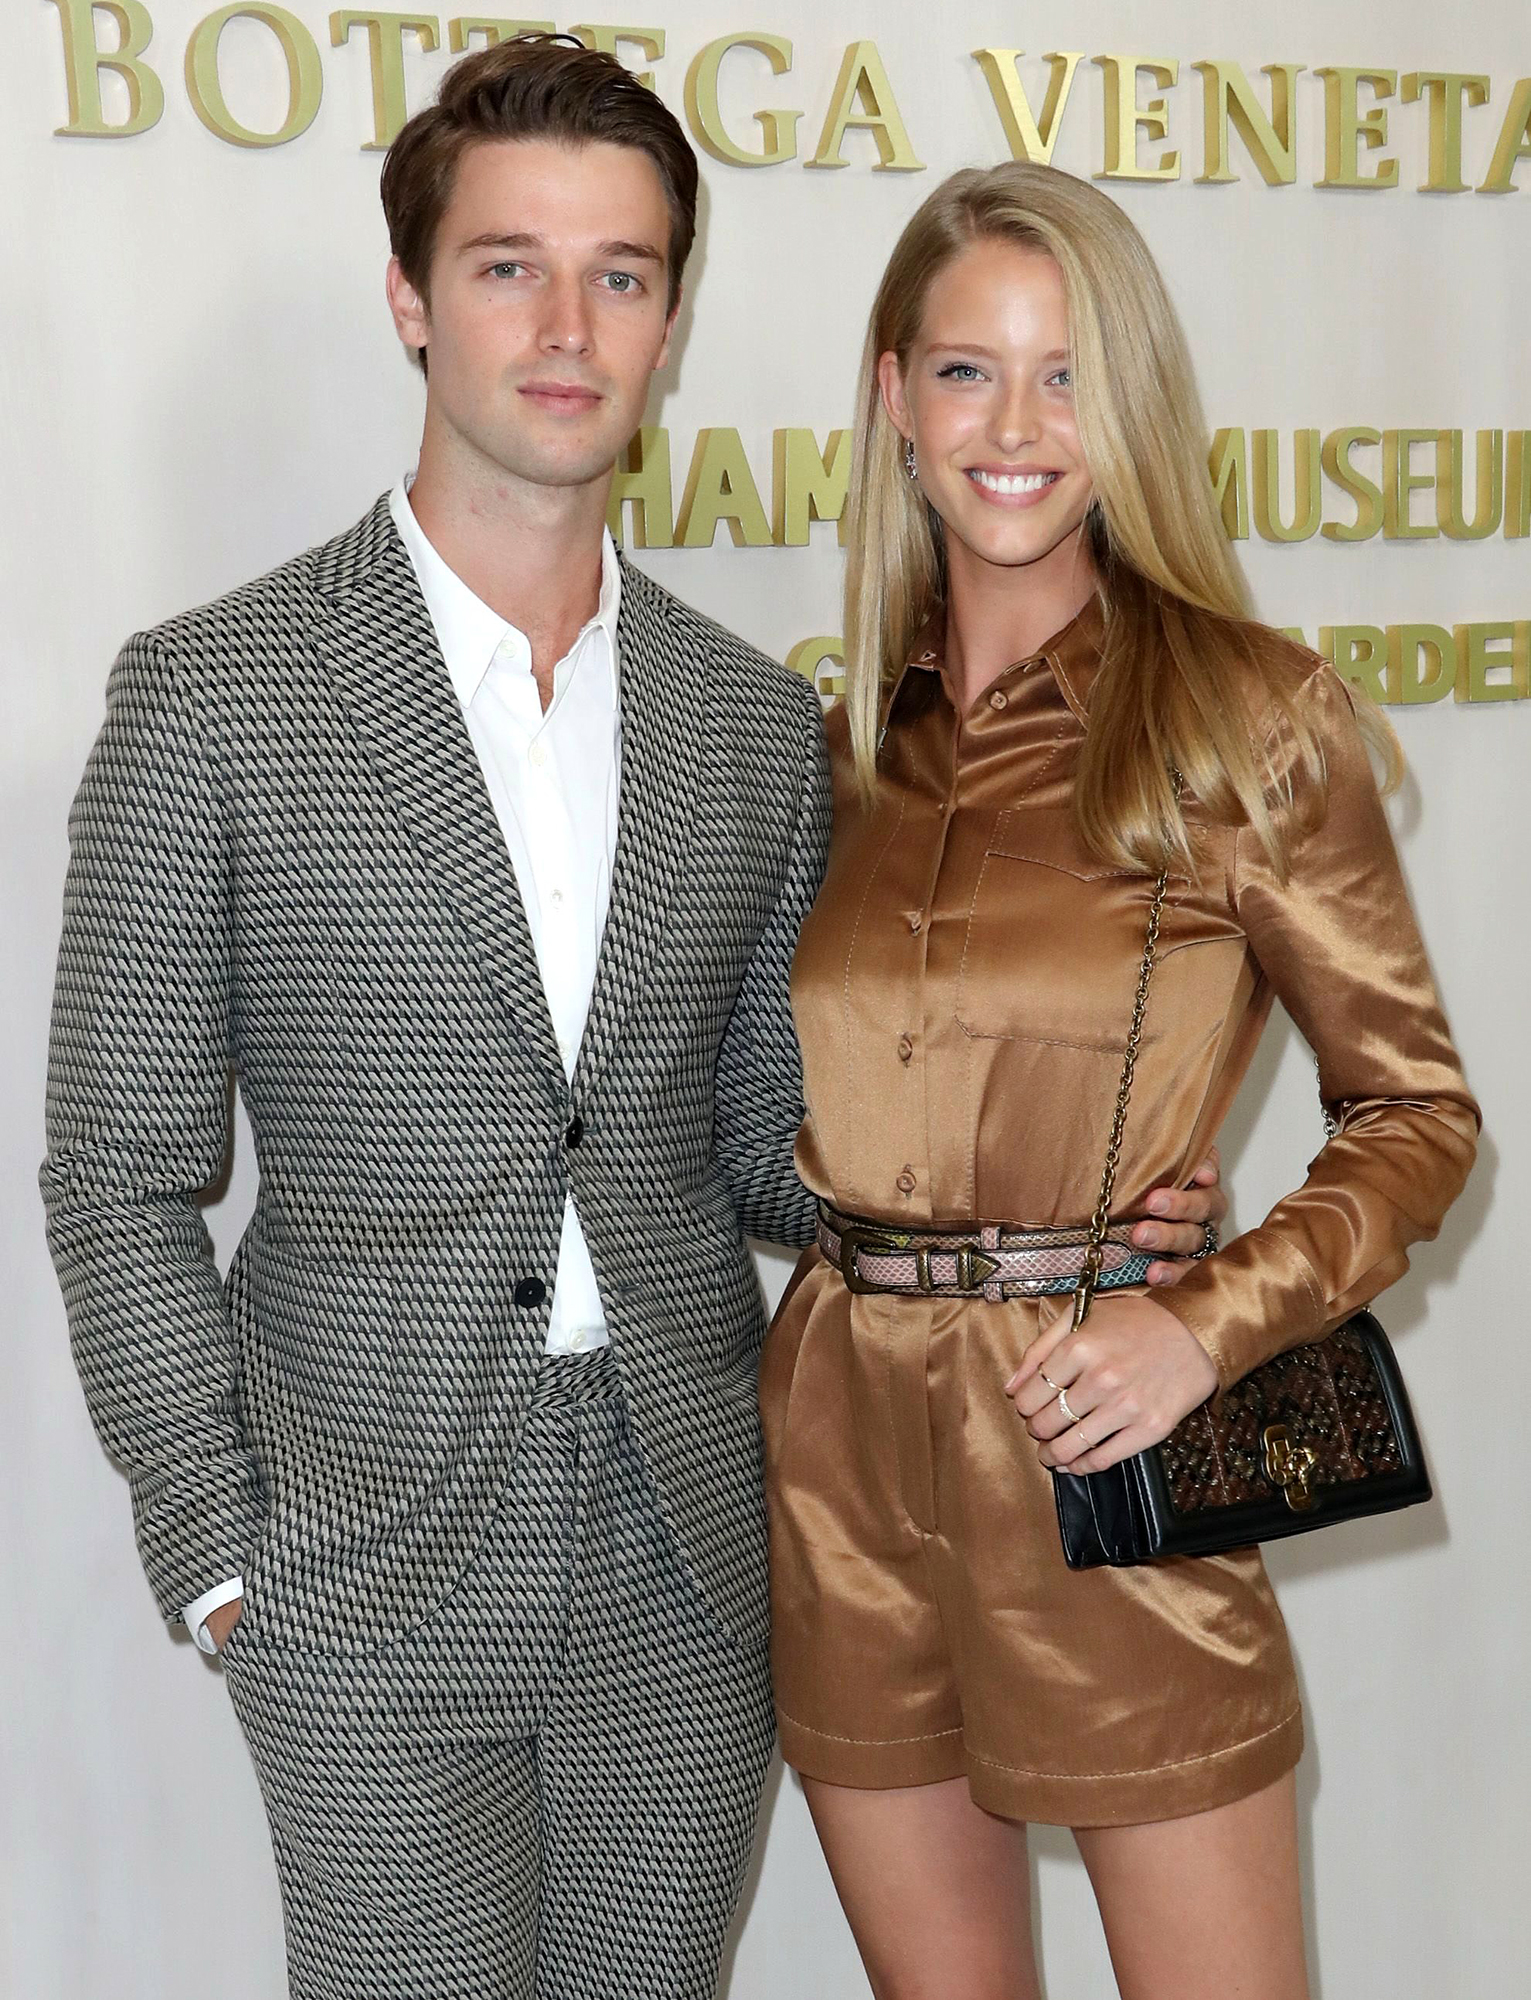 Patrick Schwarzenegger and Abby Champions Relationship Timeline